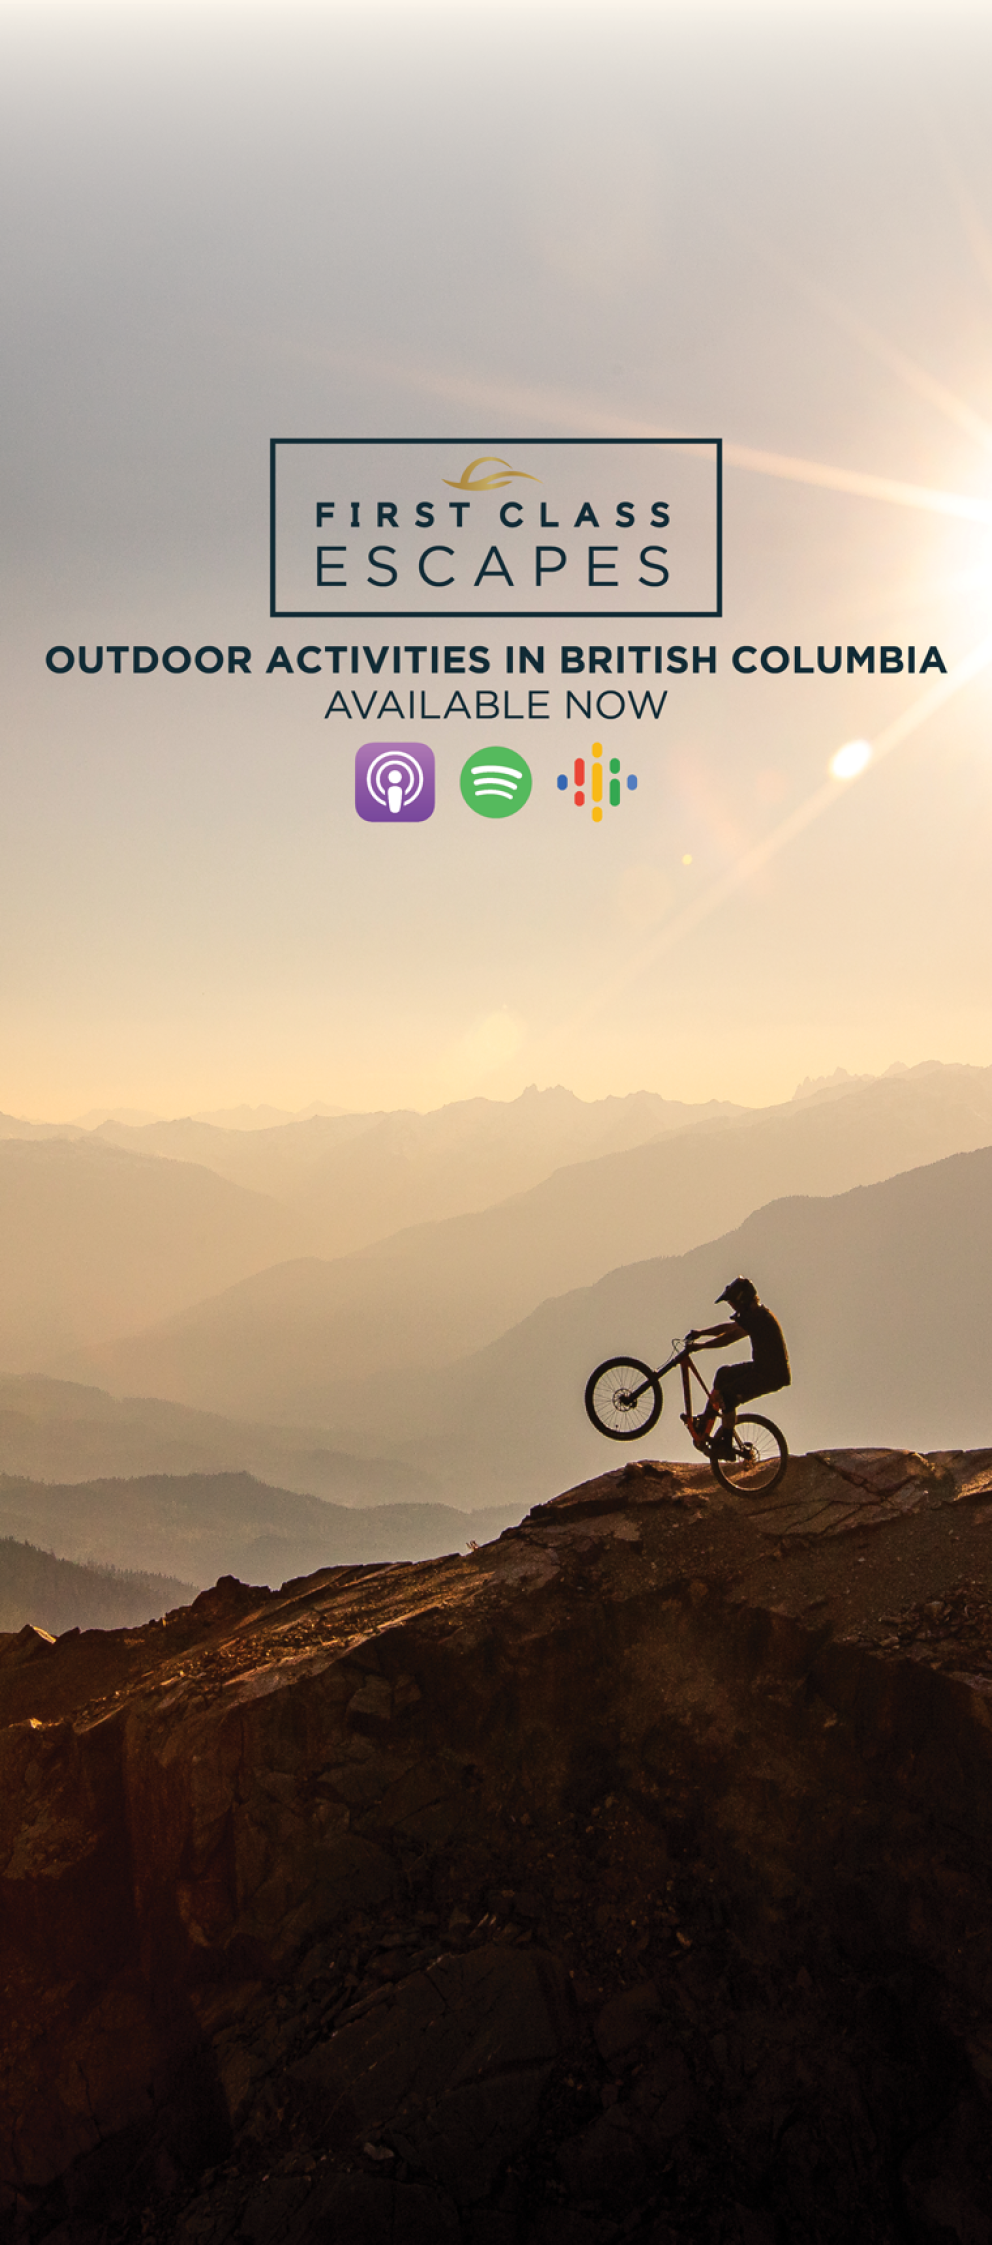 First Class Escapes - Outdoor Activities in British Columbia